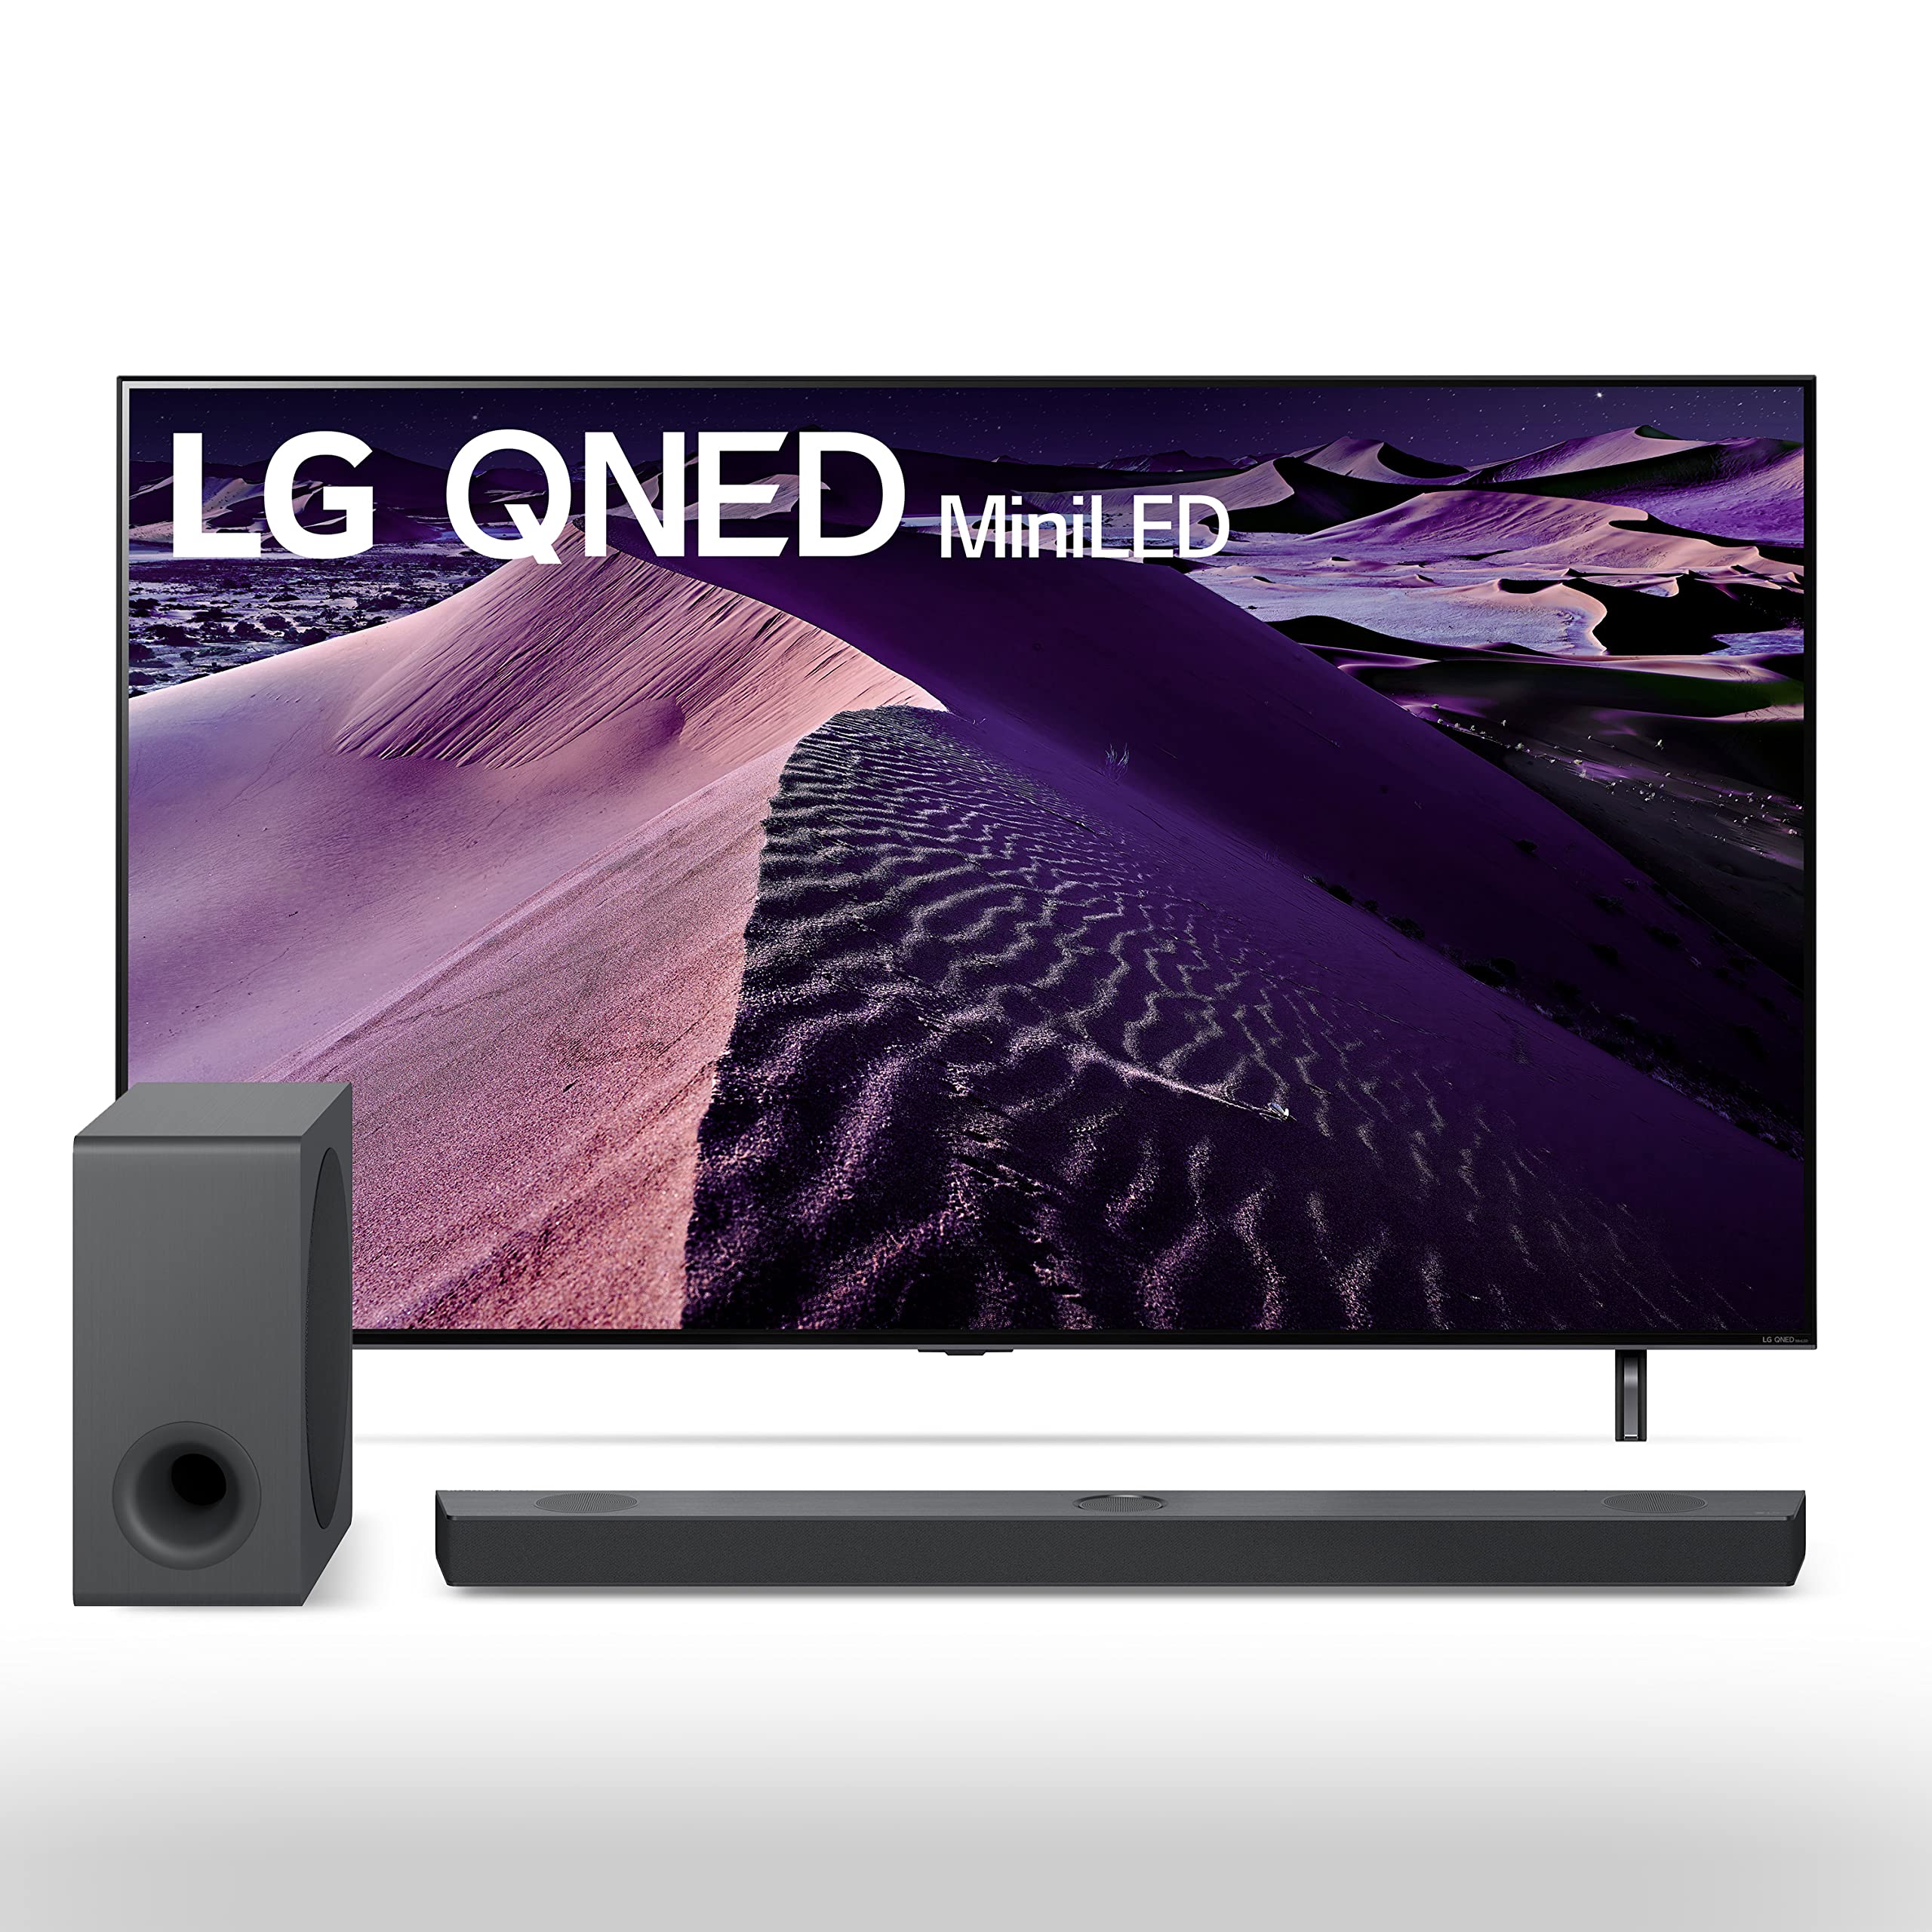 LG 55-inch Class QNED85 Series 4K Smart TV with Alexa Built-in 55QNED85UQA S90QY 5.1.3ch Sound bar w/Center Up-Firing, Dolby Atmos DTS:X, Works w/Alexa, Hi-Res Audio, IMAX Enhanced